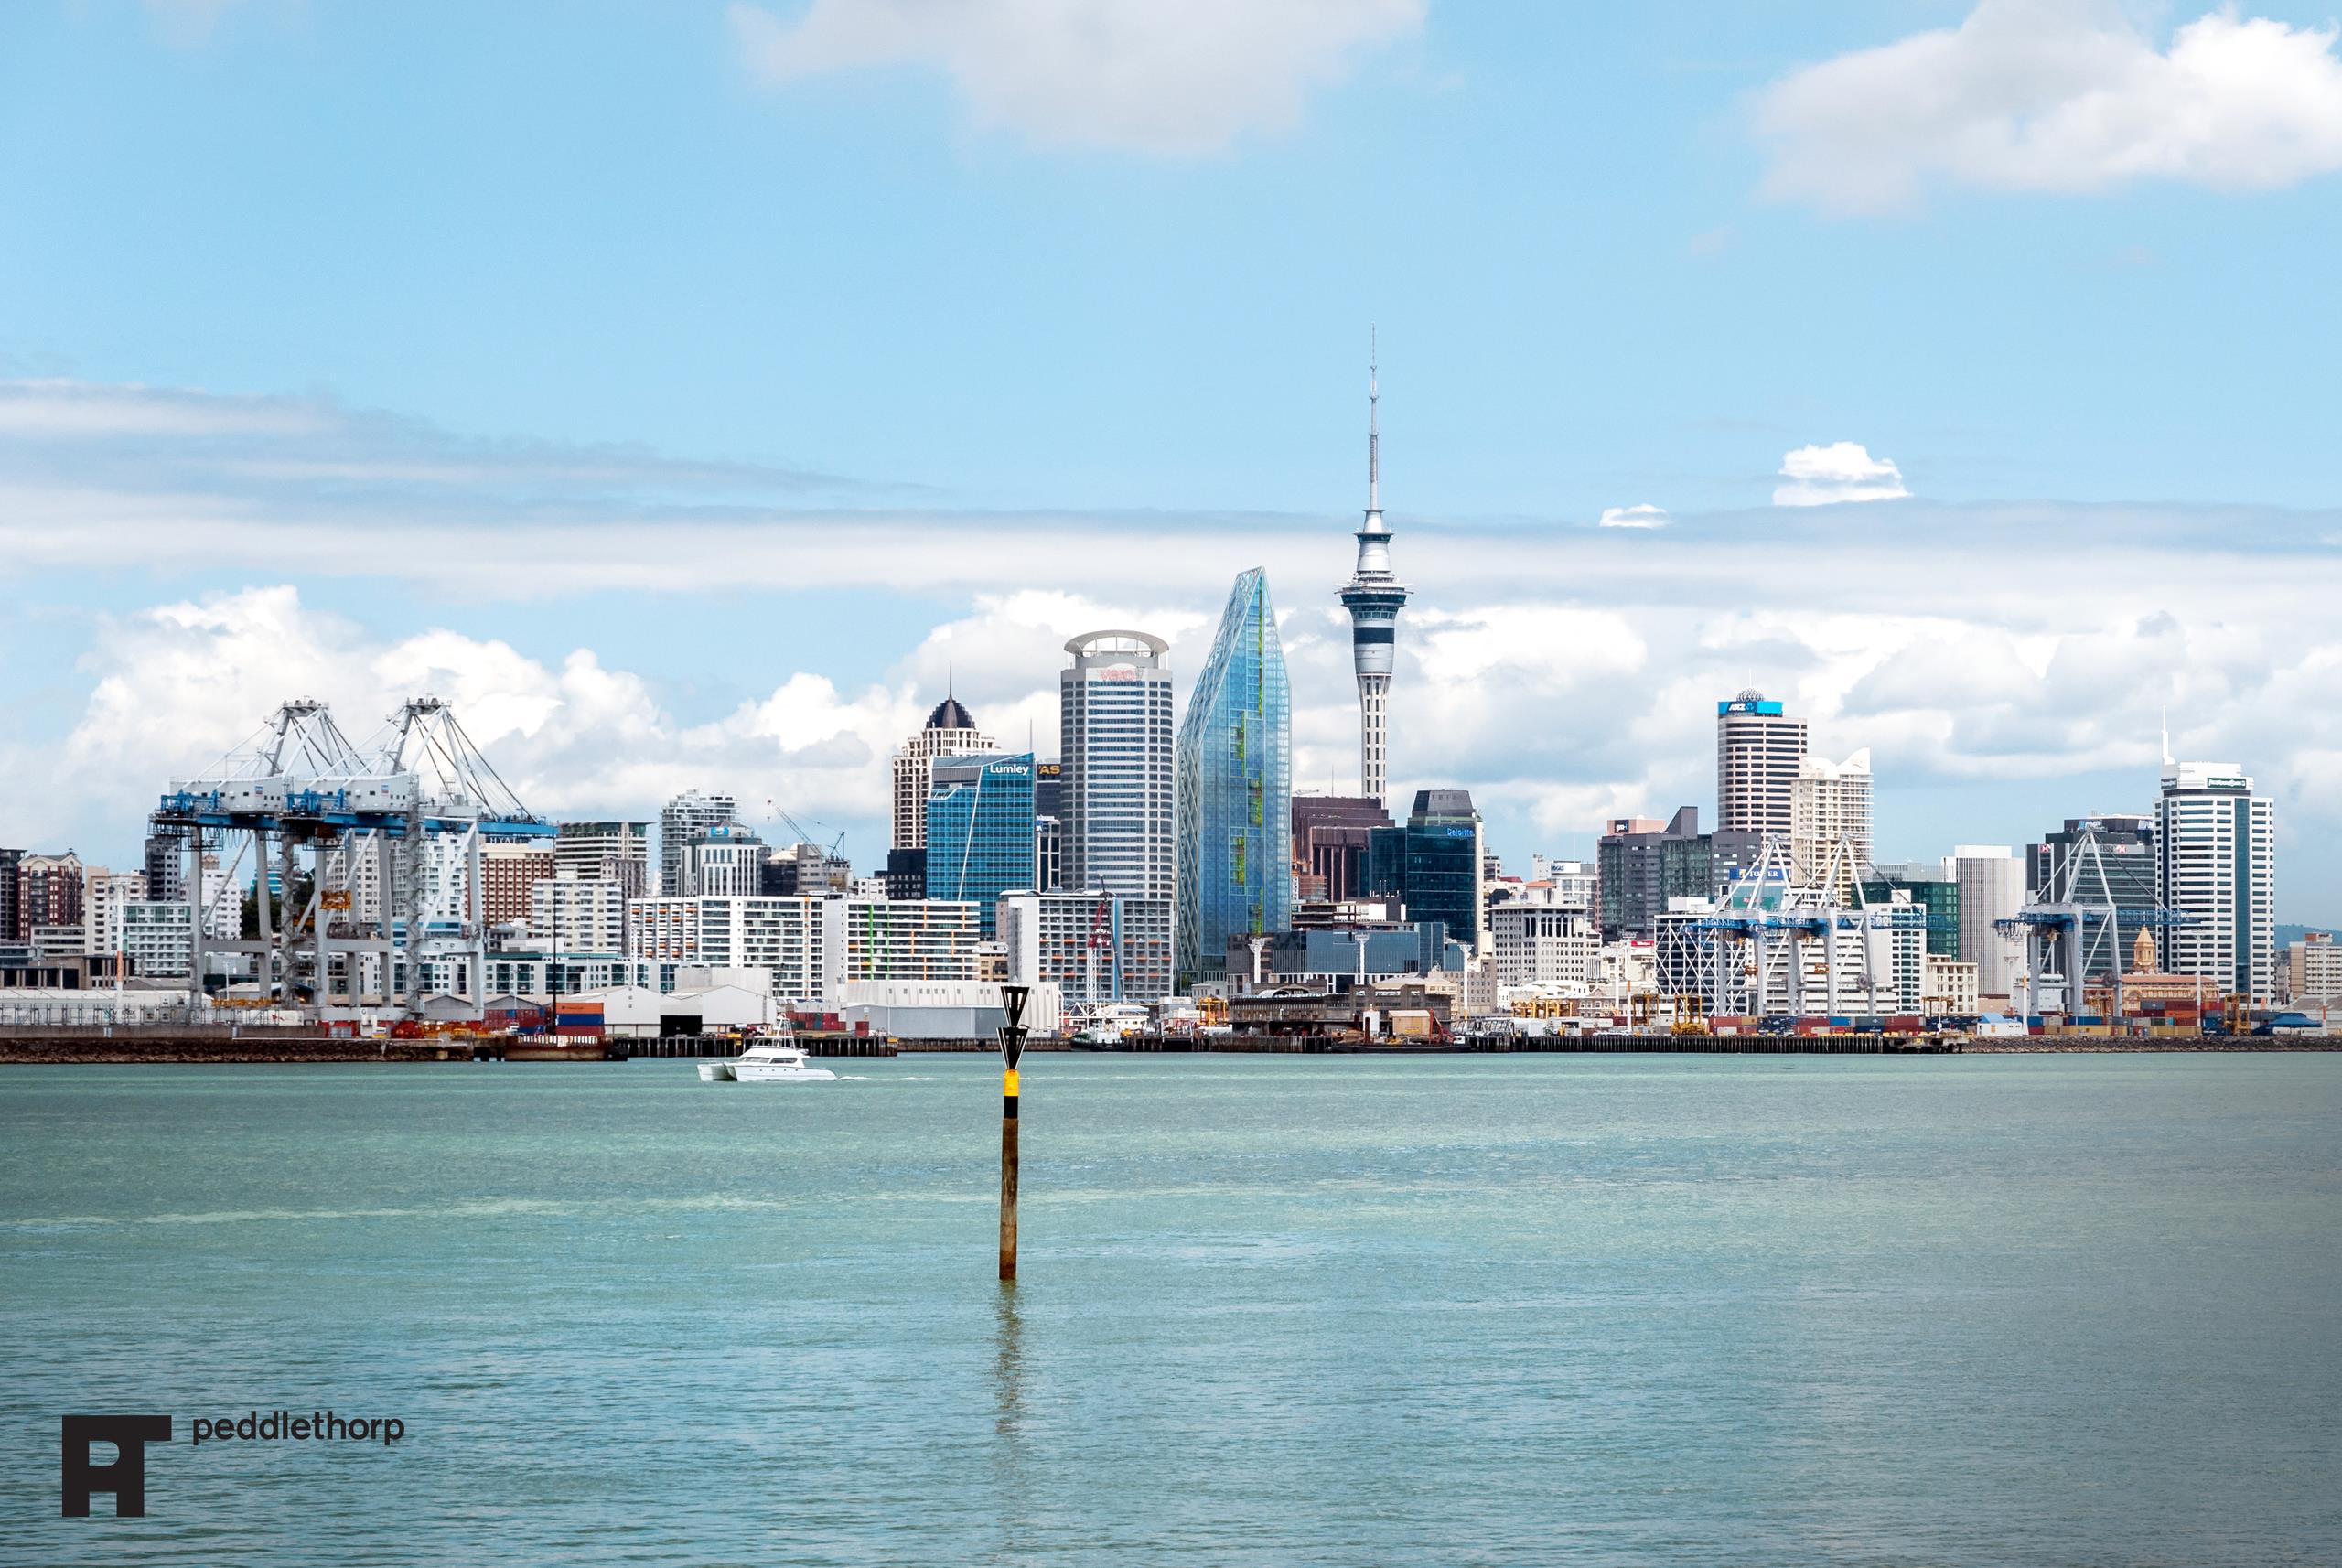 Peddlethorp's artist impression of what Auckland's skyline will look like once the Seascape tower is complete.